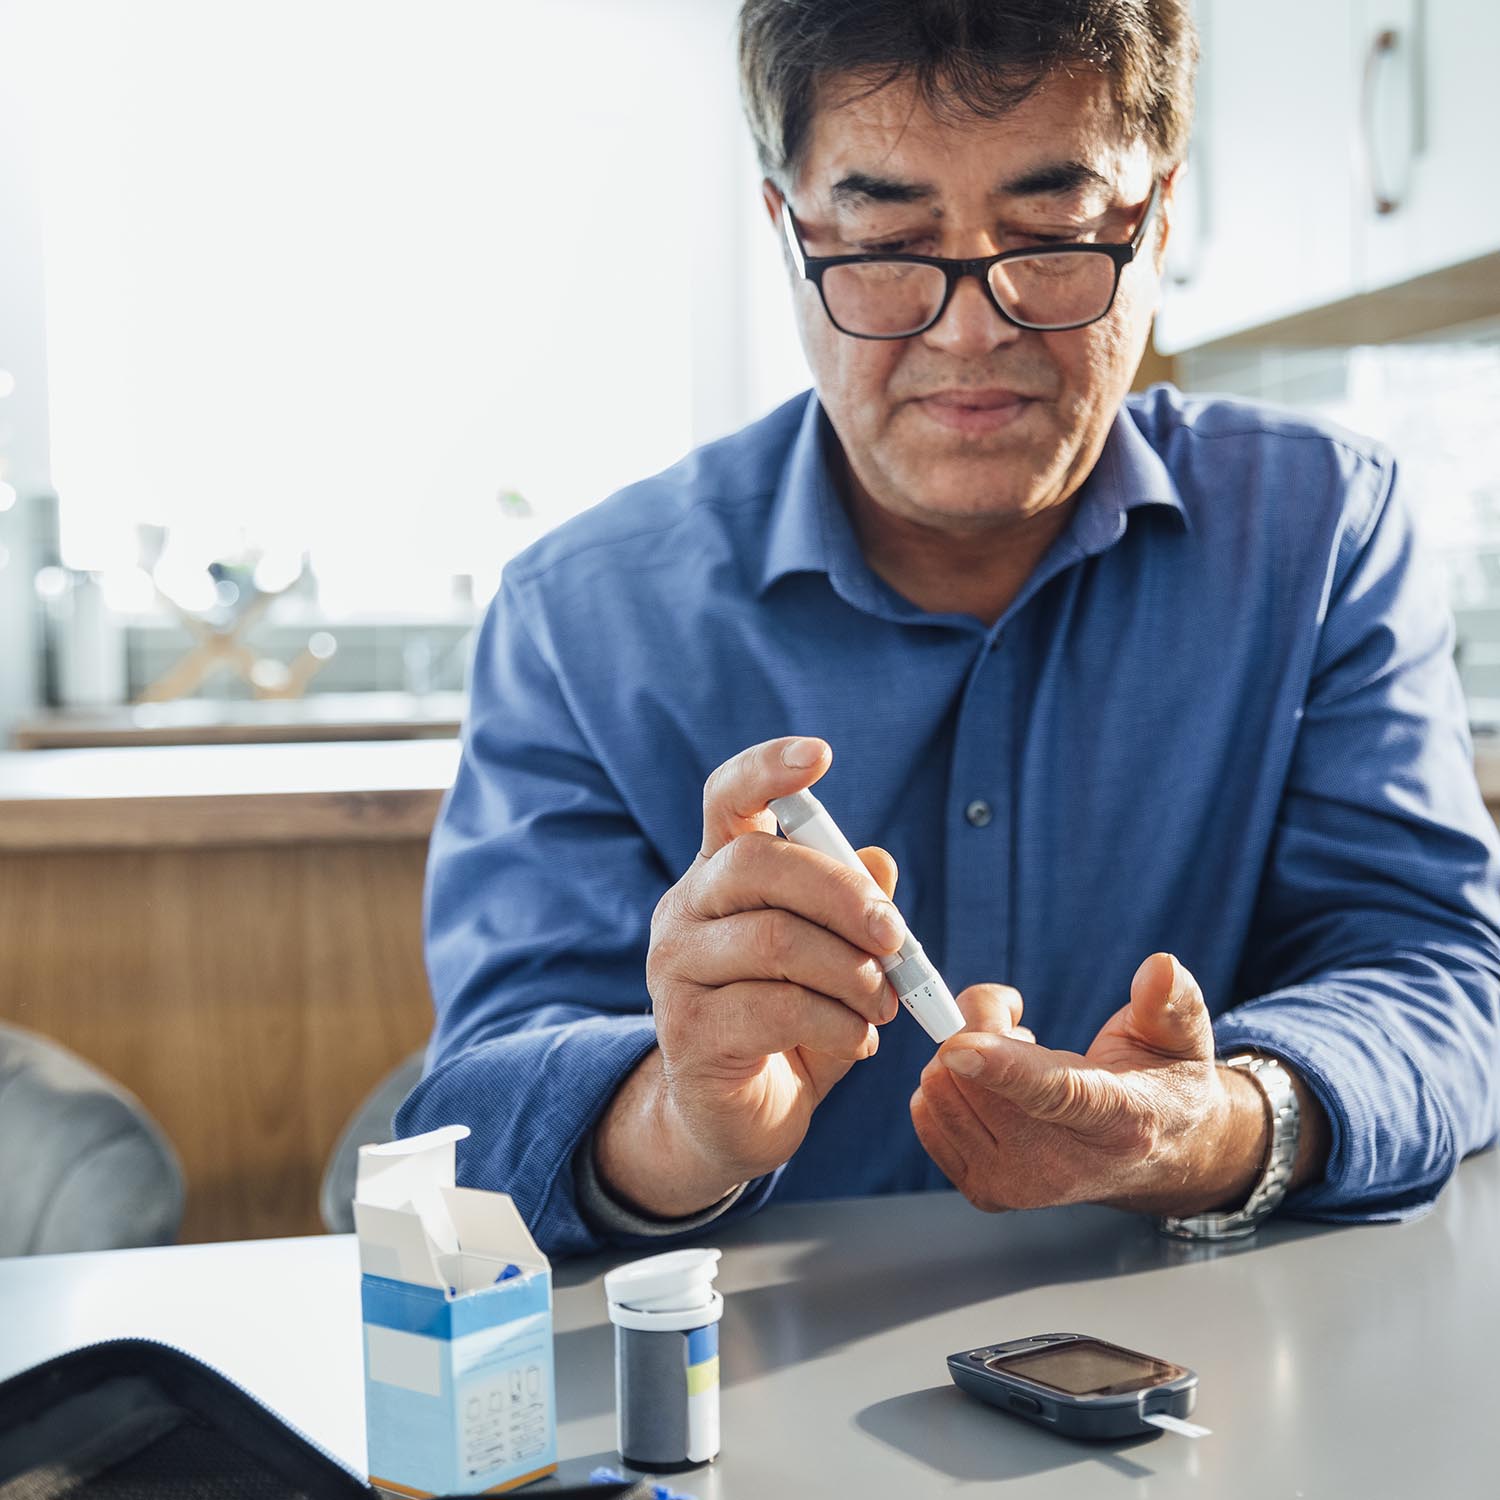 A mature Asian man sitting at a dining table in his kitchen, he is pricking his finger using a glaucometer to test his blood sugar levels, he is managing his diabetes.